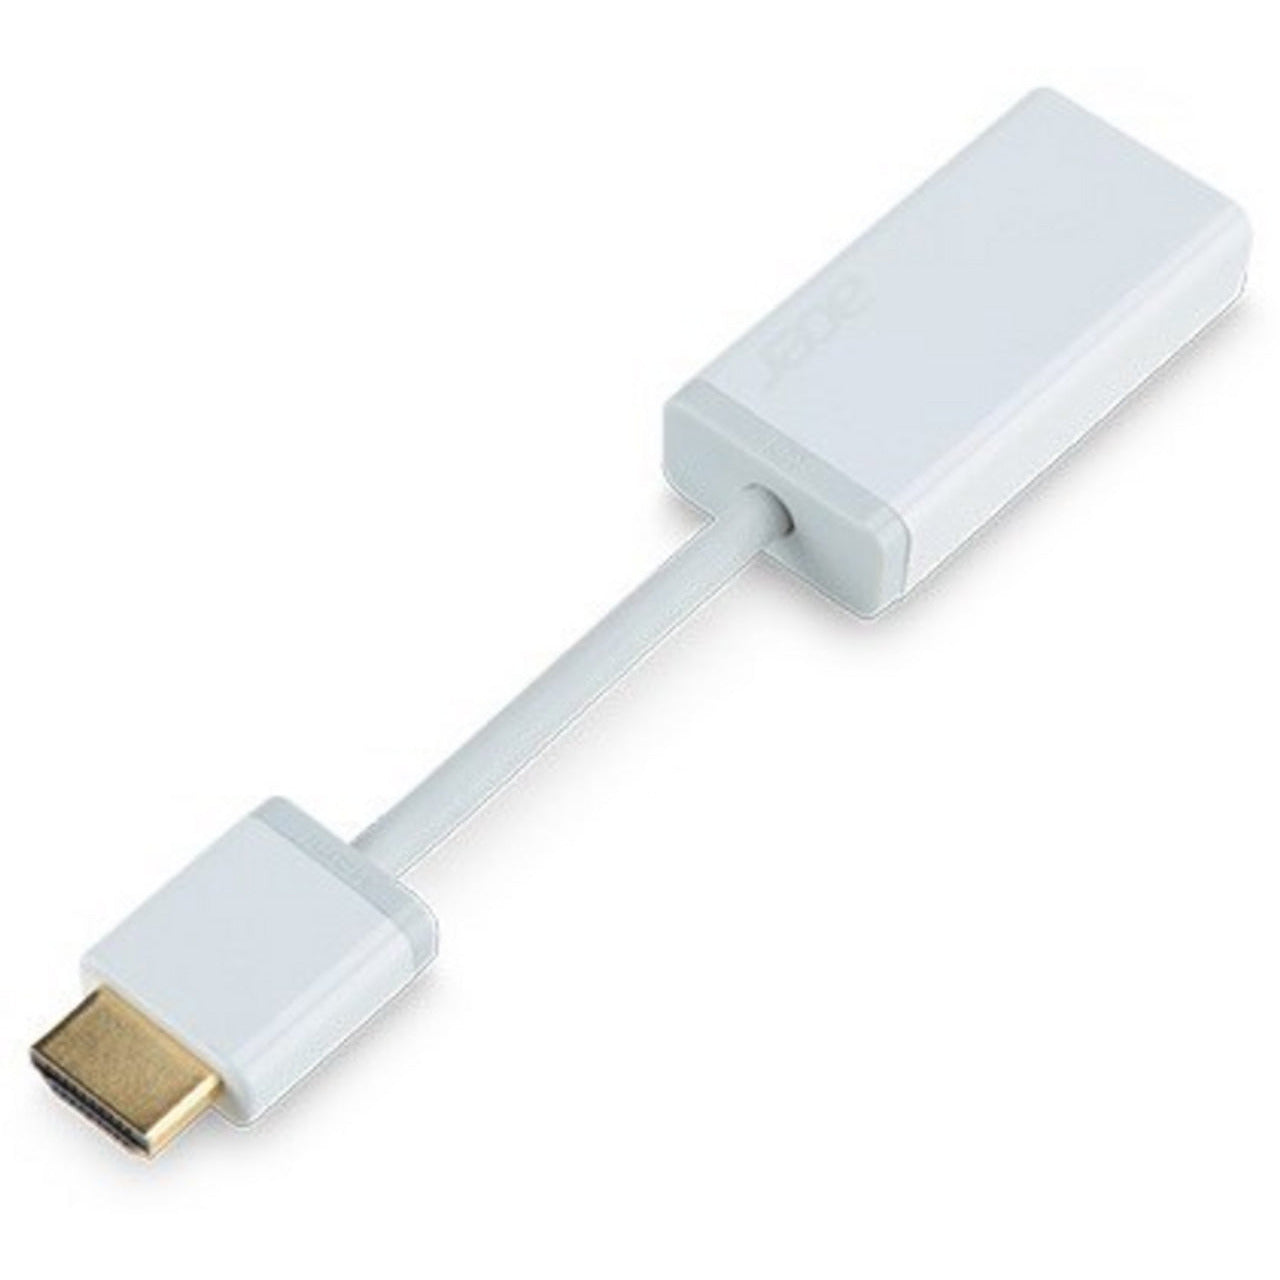 Acer ACB521 HDMI to VGA Adapter up to 1080p Plug and Play - White